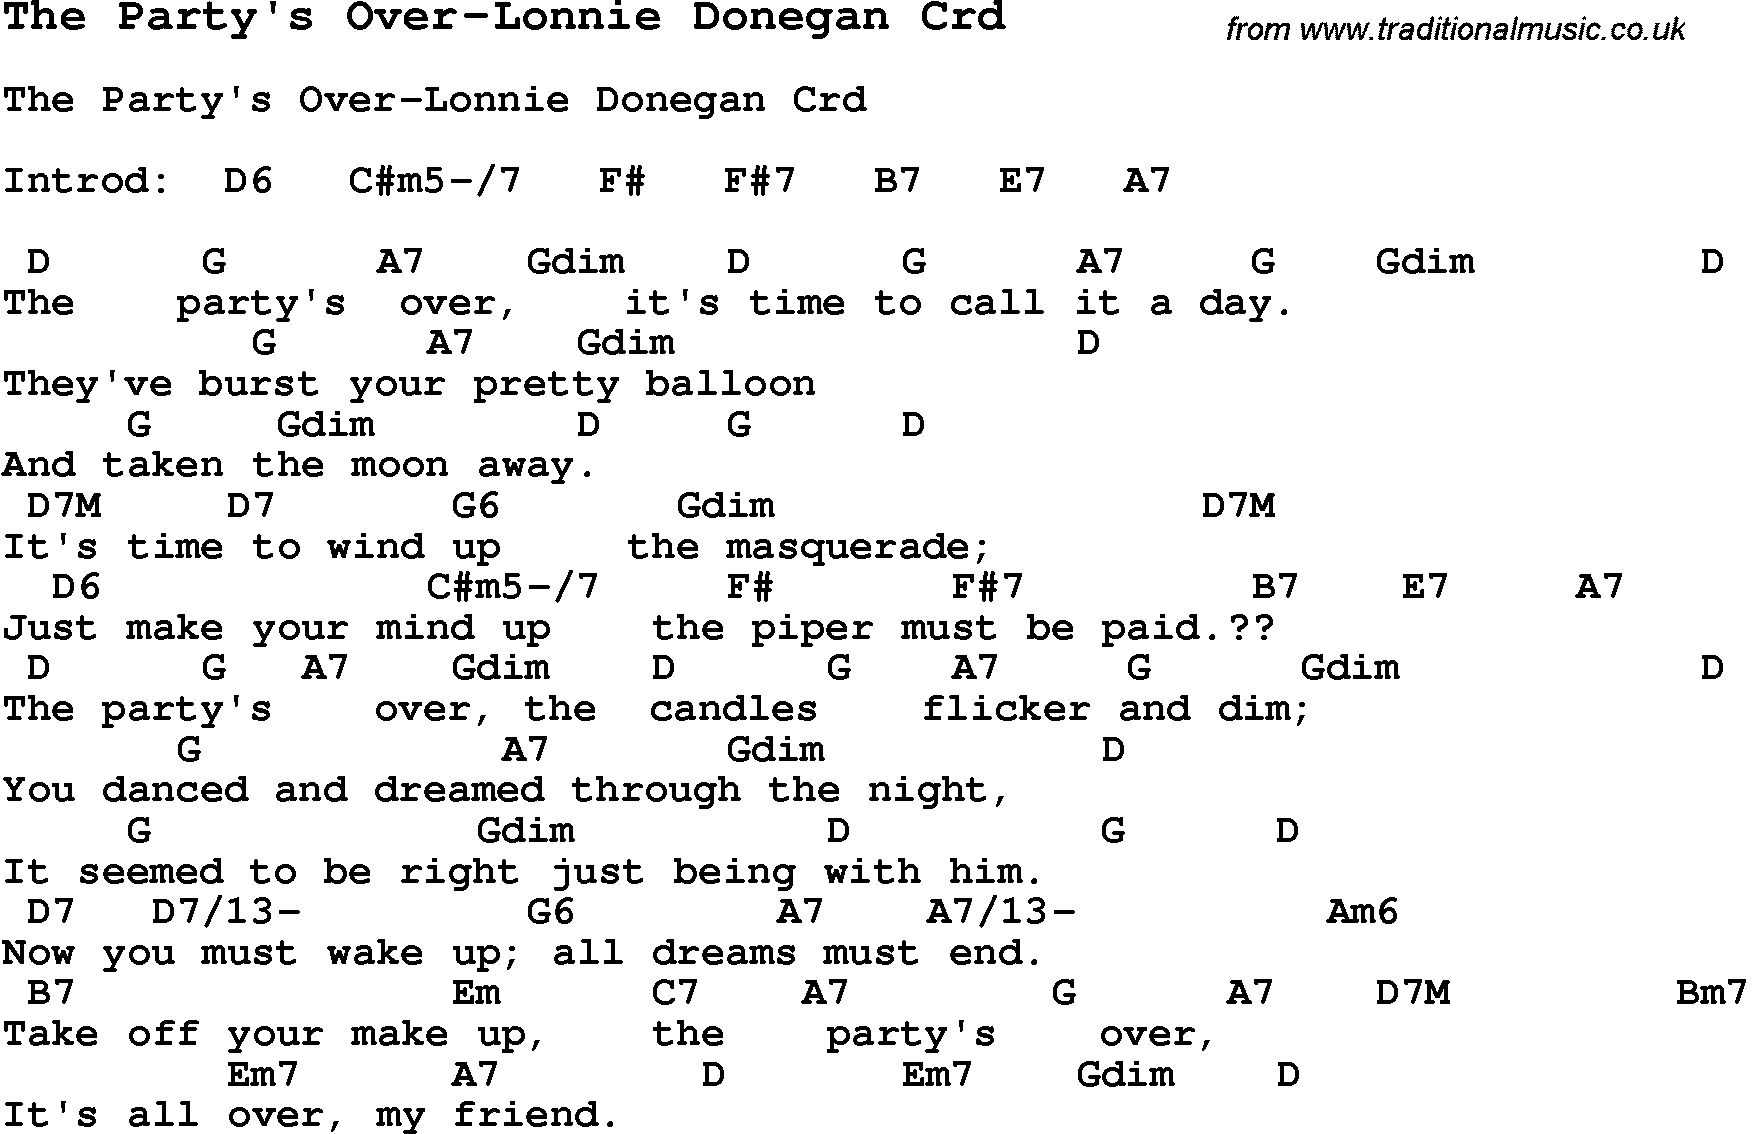 Skiffle Song Lyrics for The Party's Over-Lonnie Donegan with chords for Mandolin, Ukulele, Guitar, Banjo etc.